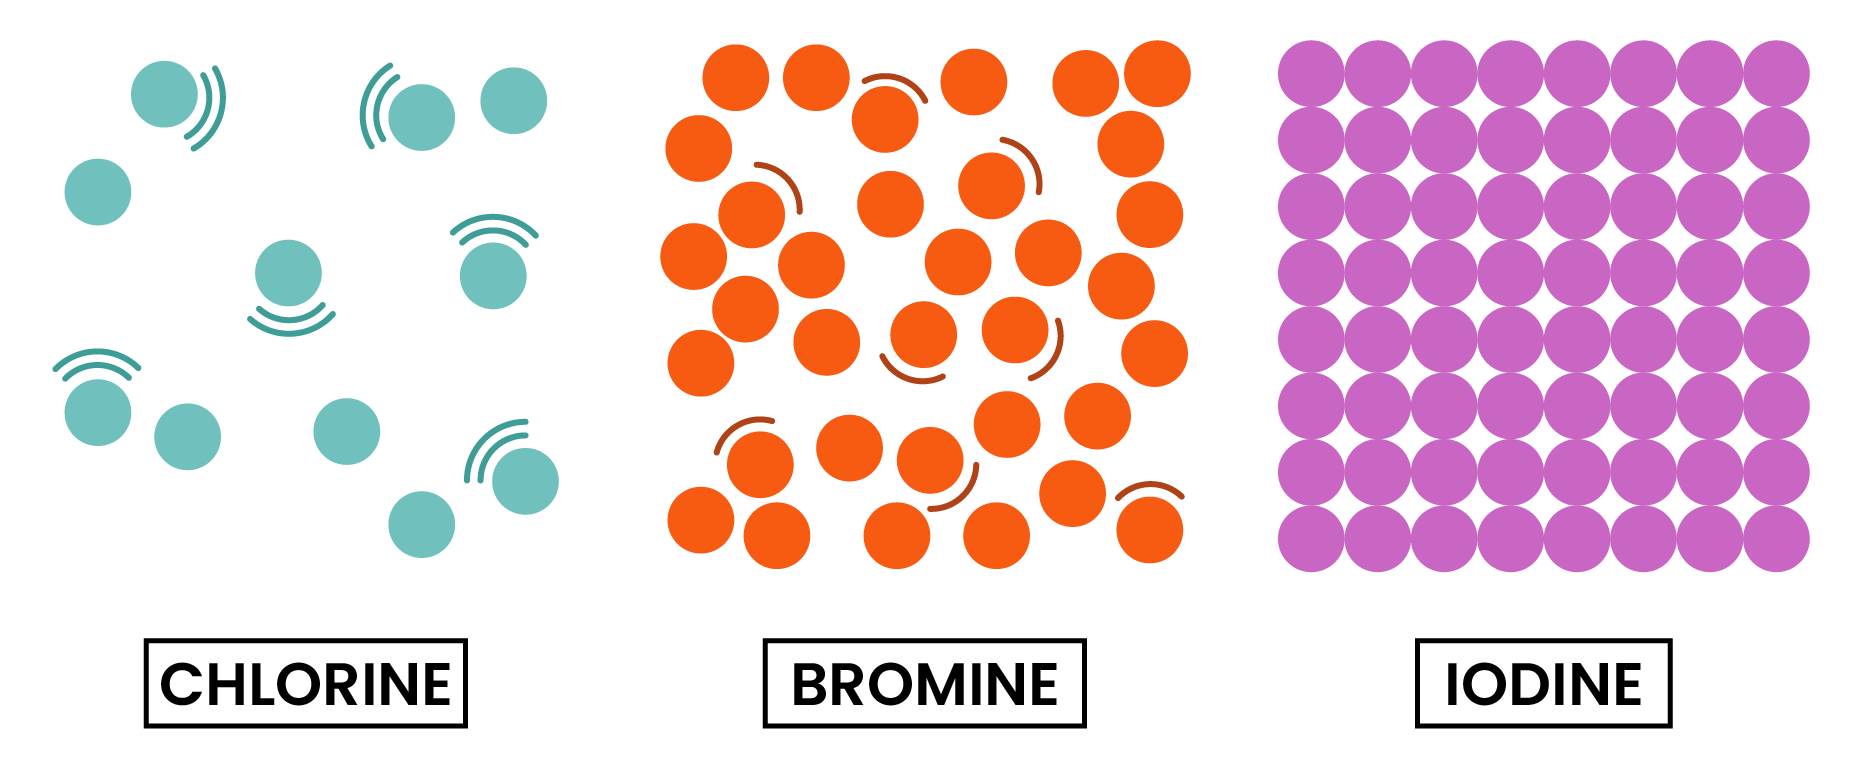 edexcel_igcse_chemistry_topic 11_group 7 (halogens) chlorine, bromine, and iodine_002_ chlorine bromine and iodine state of matter diagram room temperature